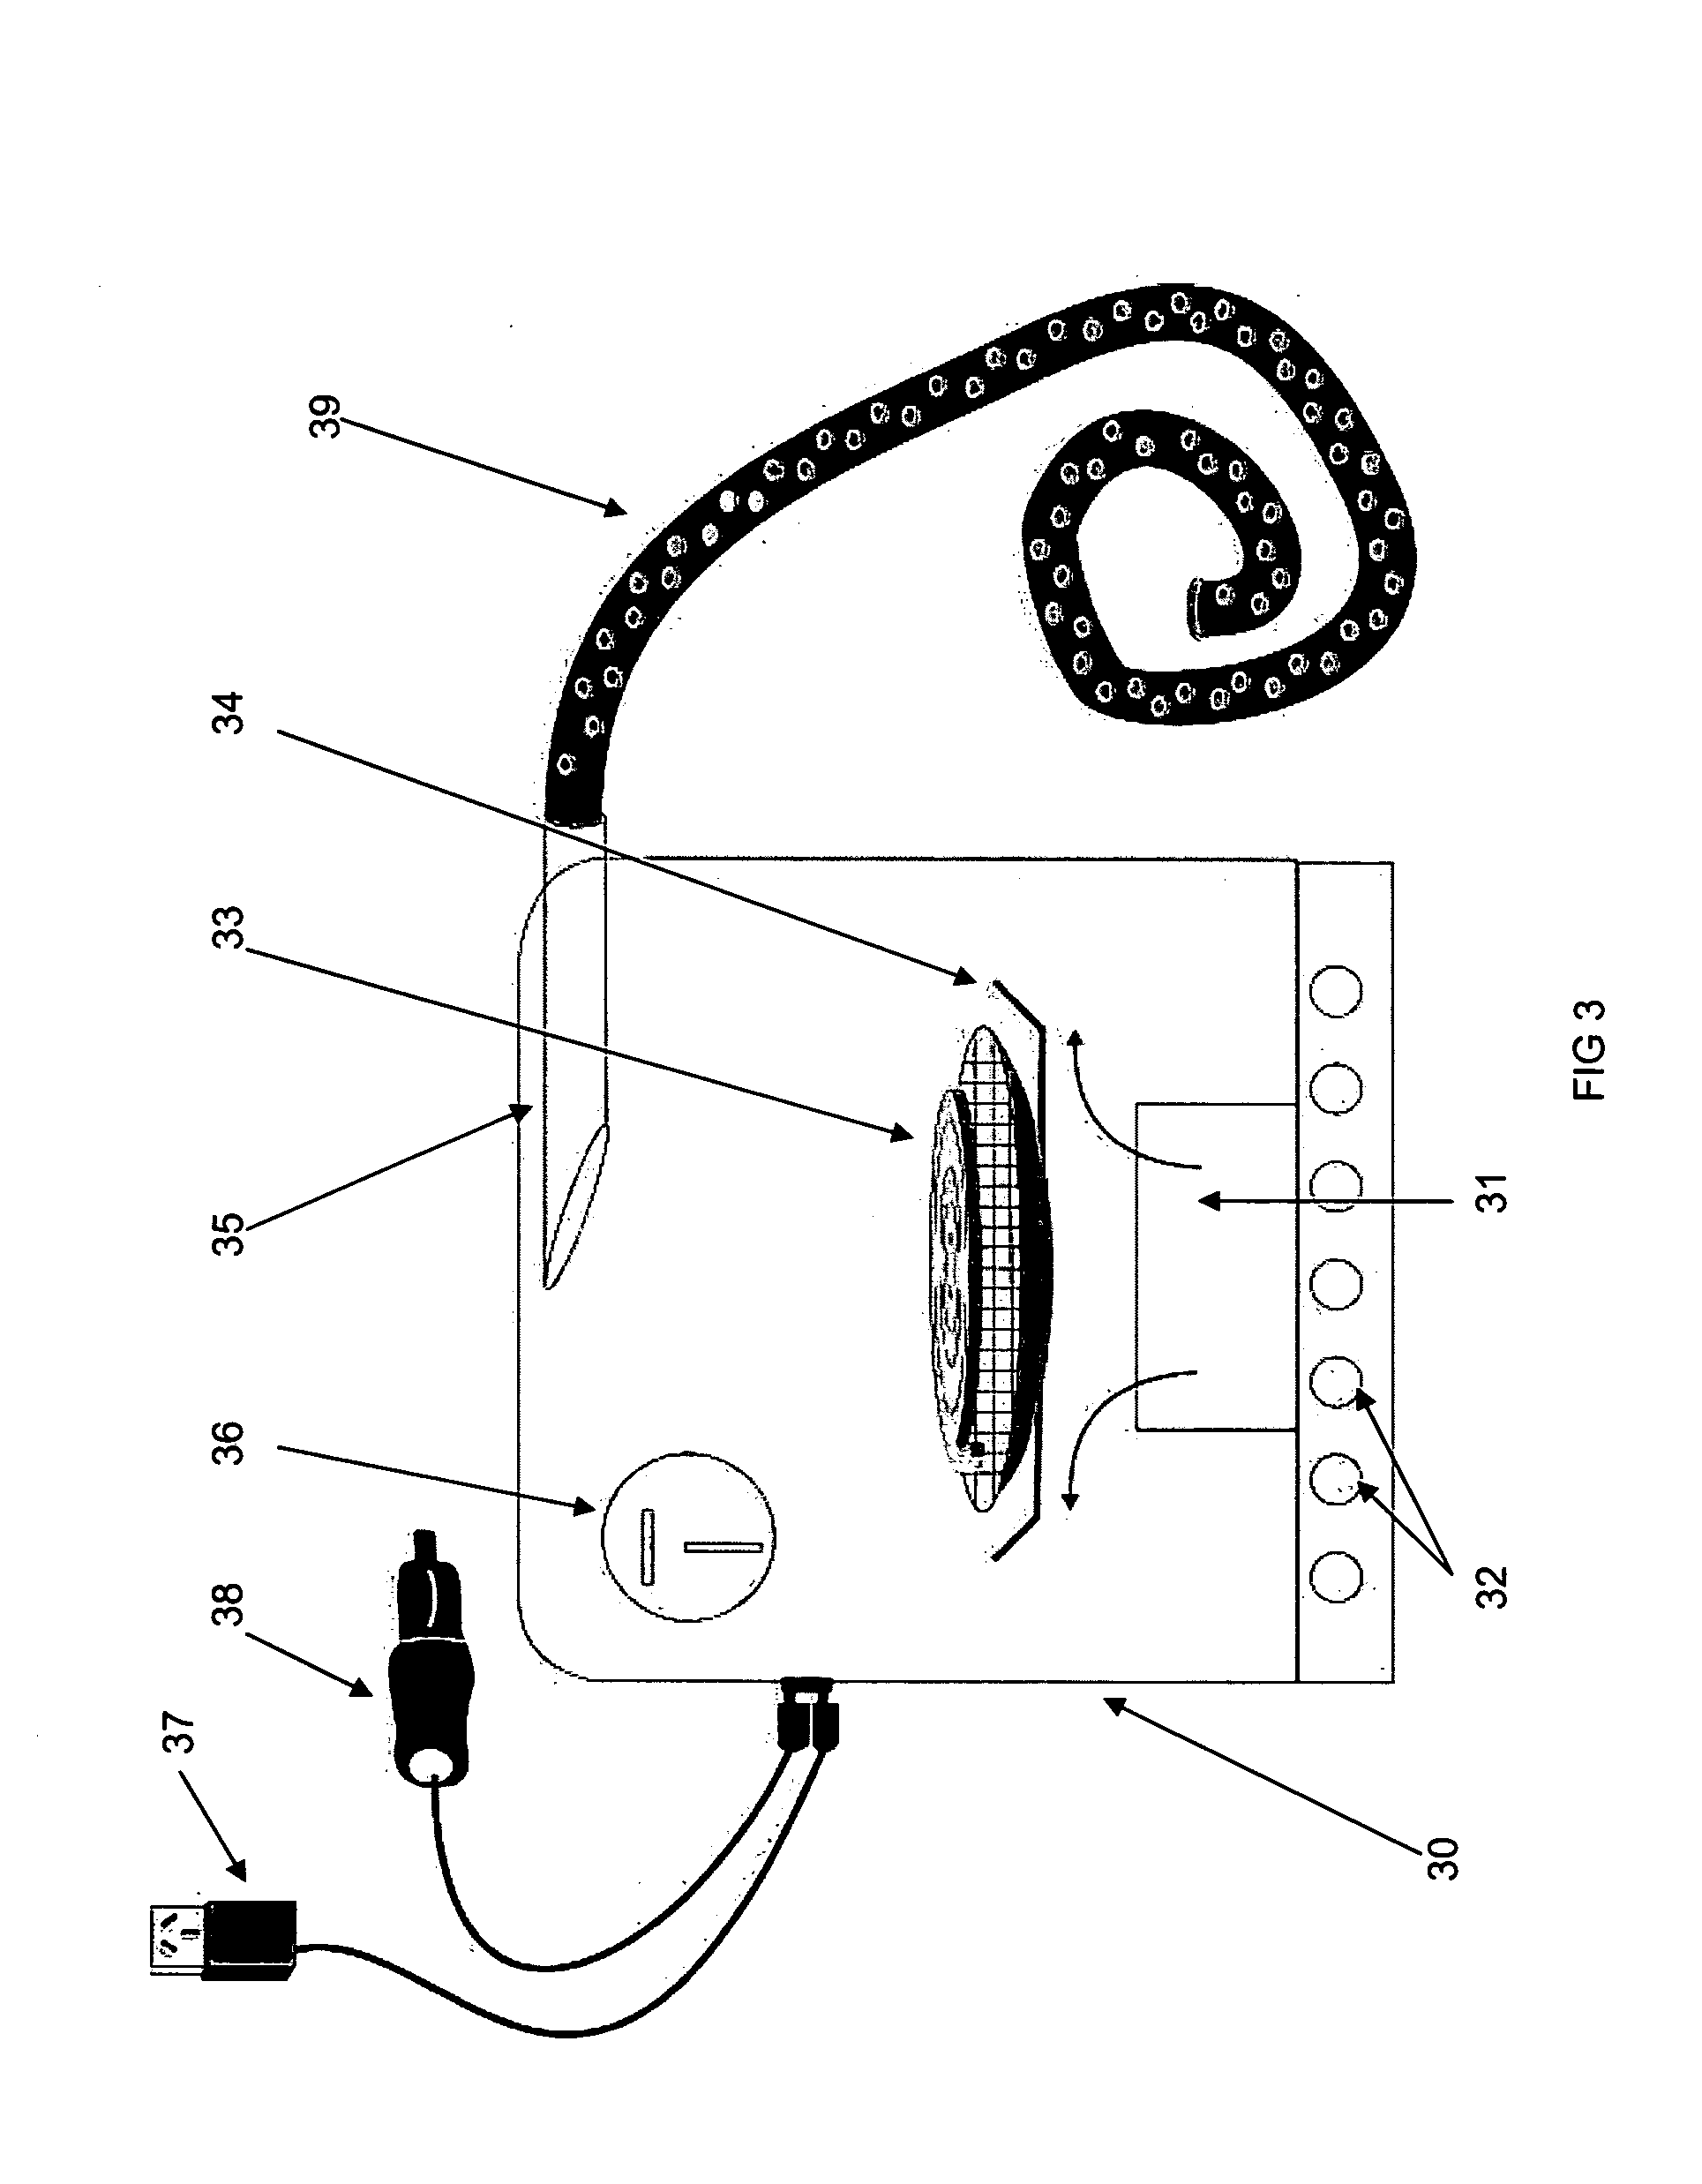 Apparatus to better distribute an insect repellant or fragrance